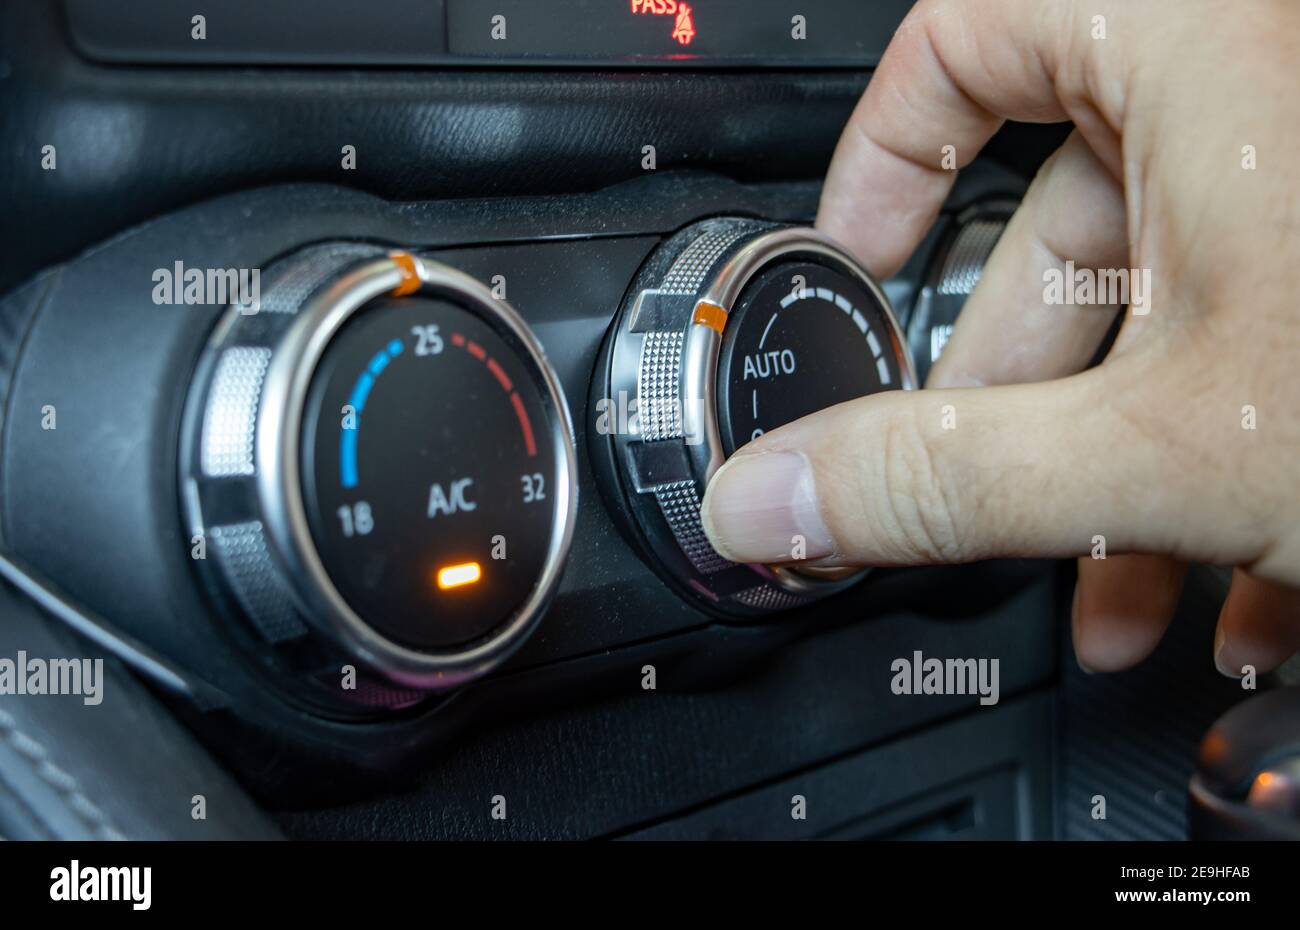 Using air condition in a car, close up. The hand manipulates the  ventilation control knob inside the car Stock Photo - Alamy